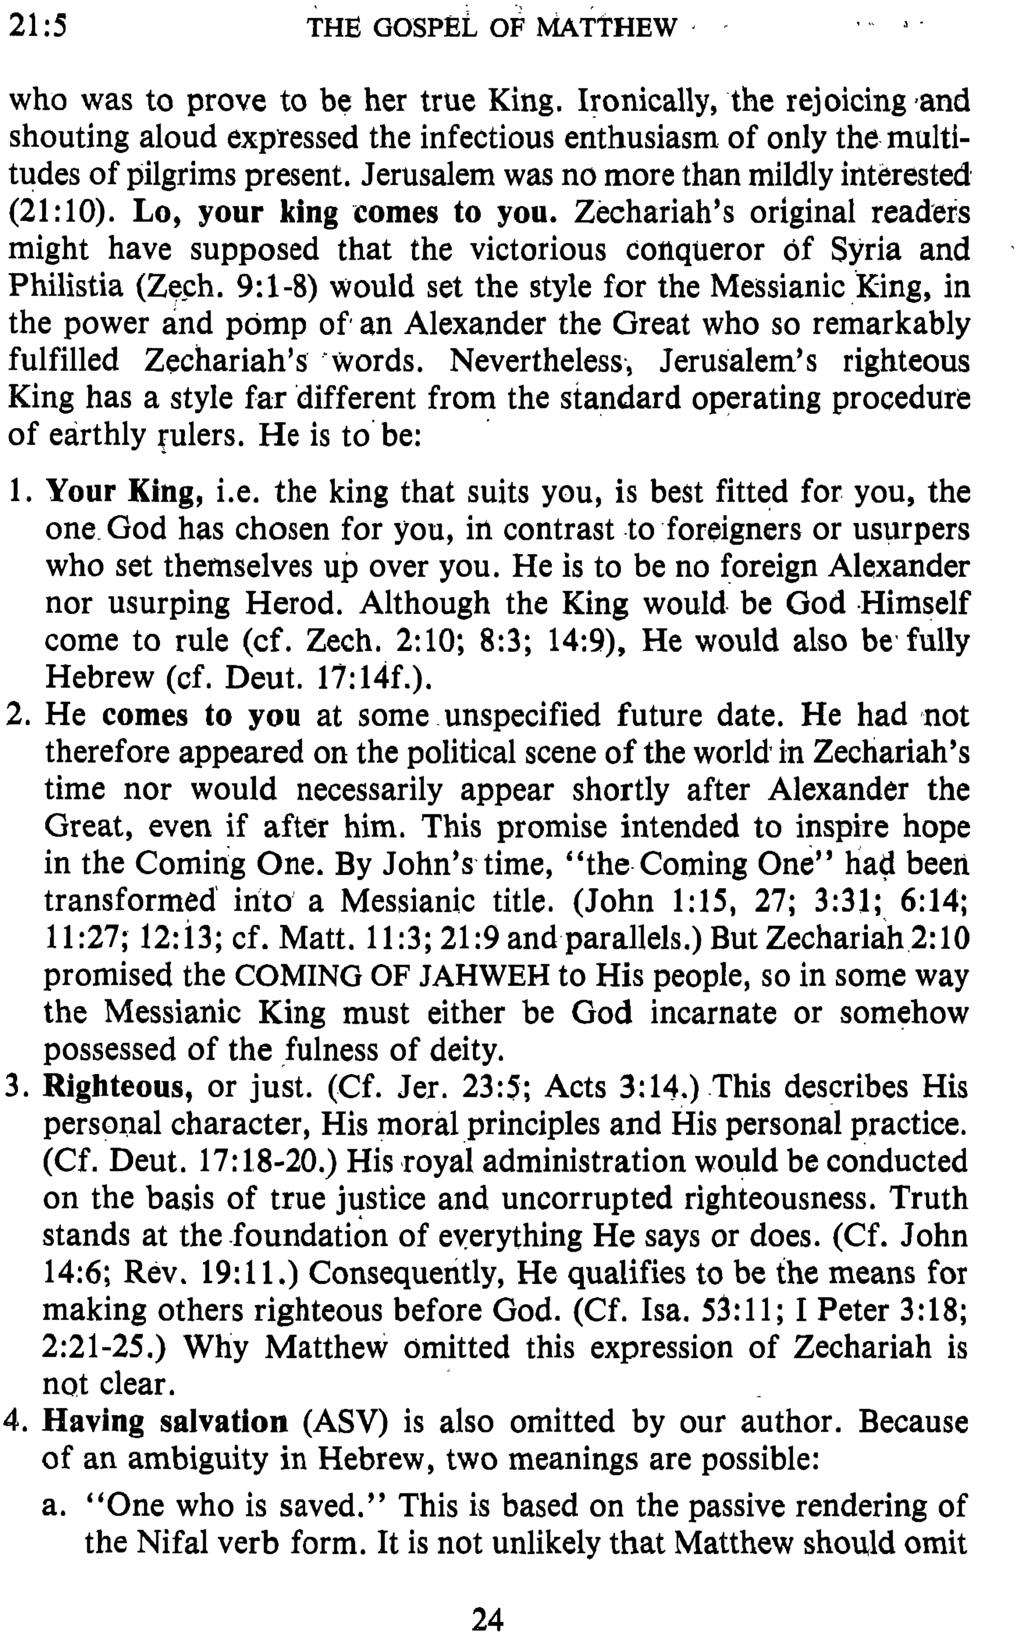 213 THE GOSPEL OF MATTHEW who was to prove to be her true King. Ironically, the rejoicing,and shouting aloud expressed the infectious enthusiasm of only the multitudes of pilgrims present.